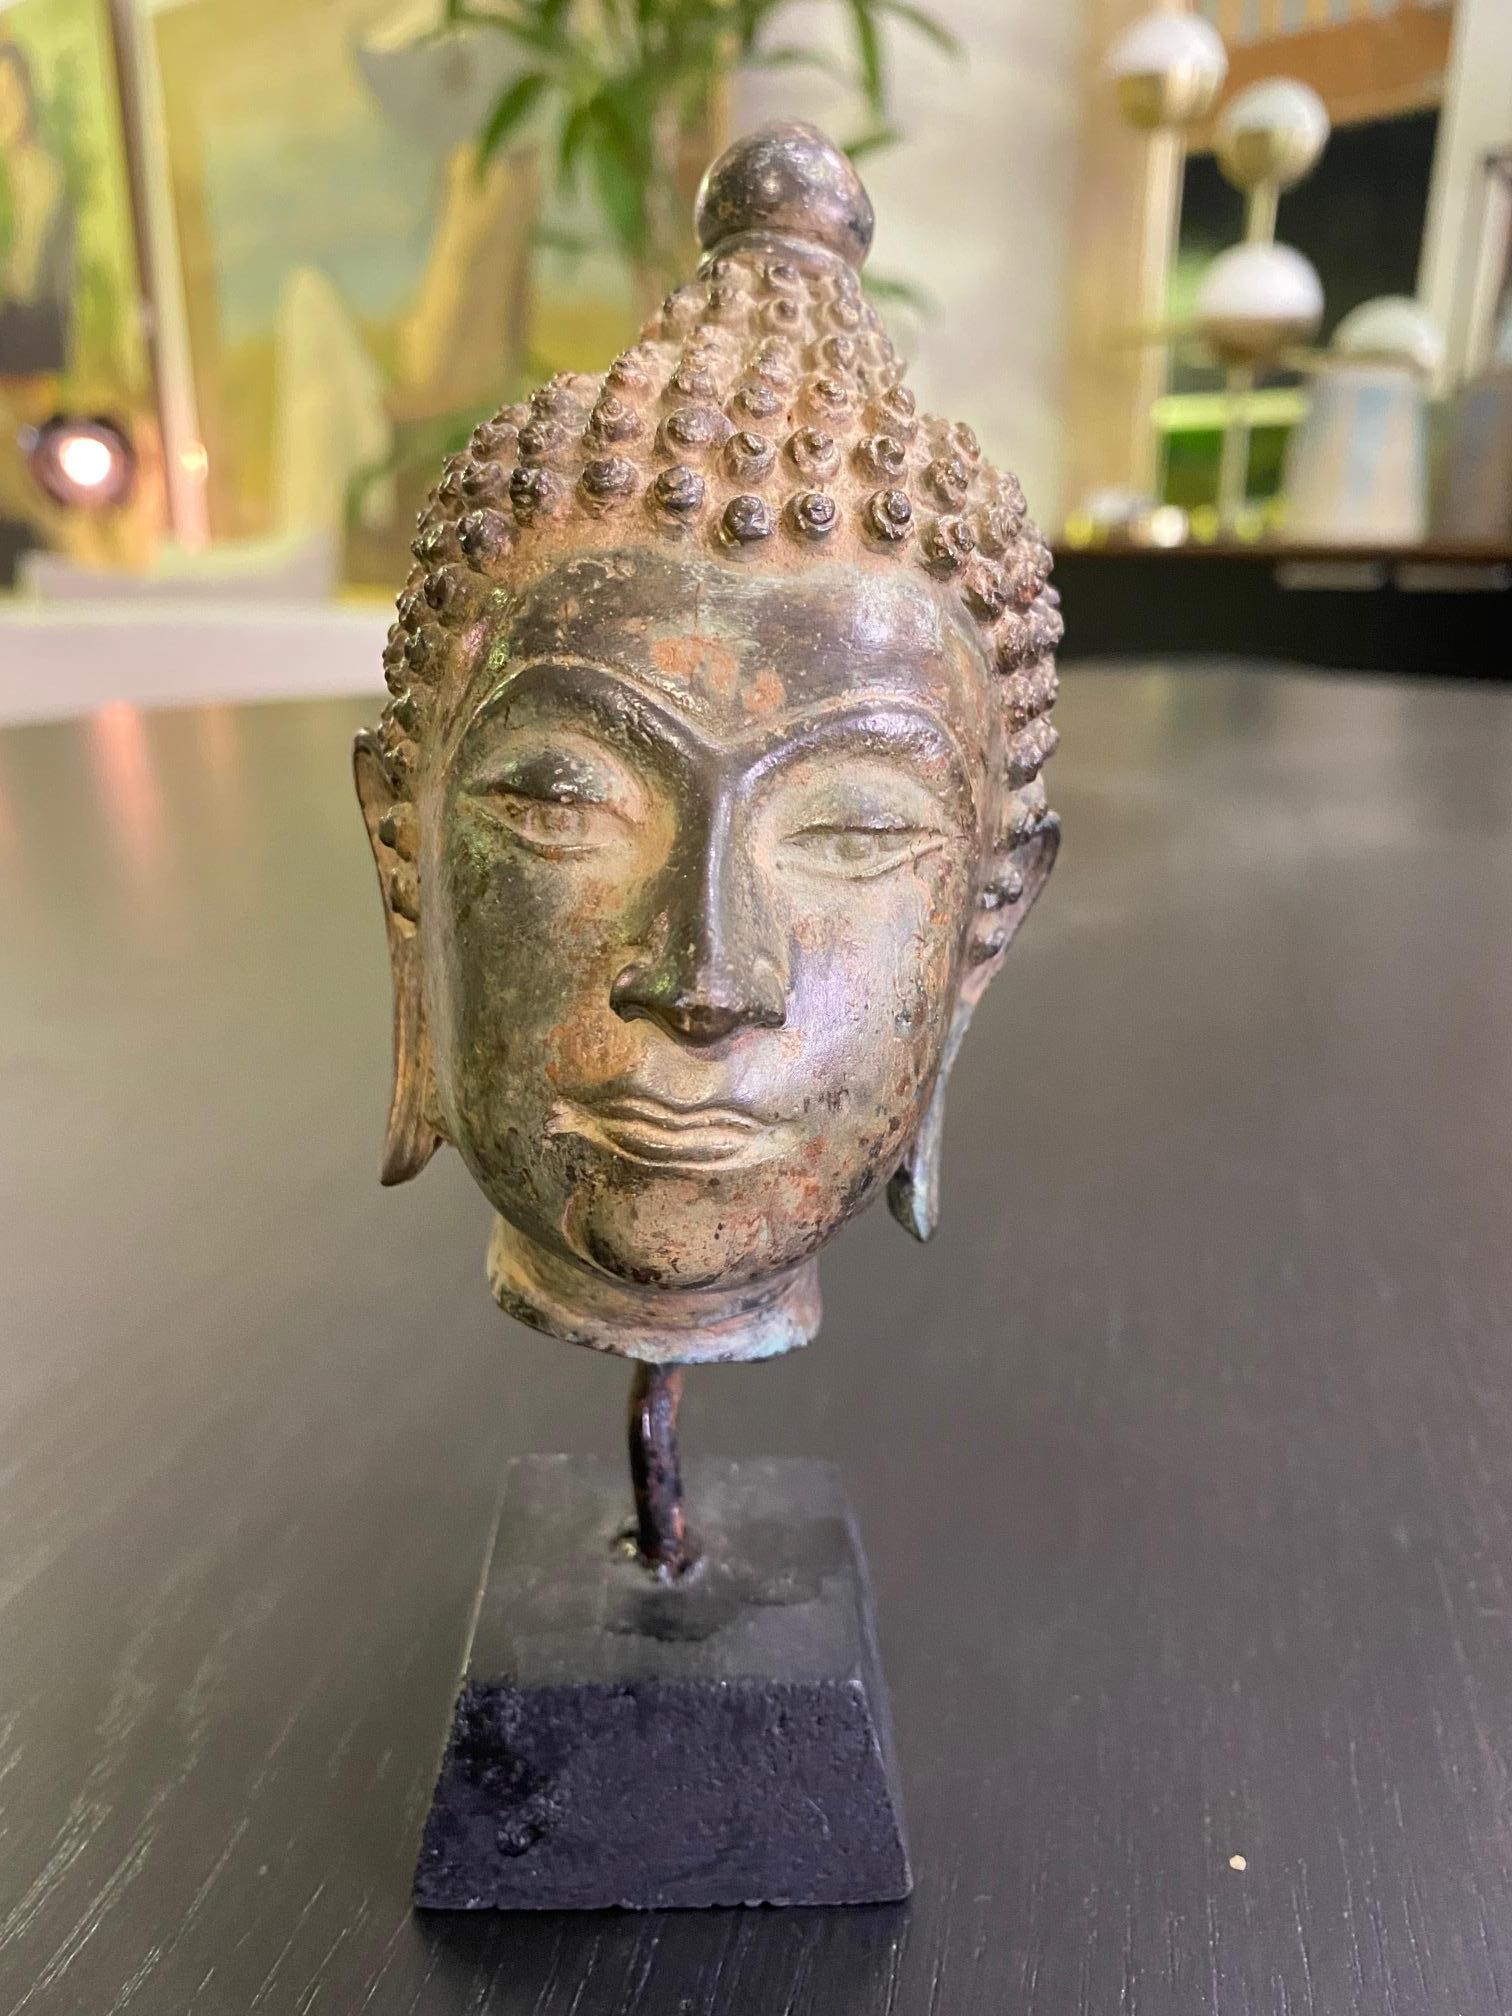 A beautifully sculptured Thai/ Siam Buddha head on a custom museum mount Stand. The Buddha's eyes are semi-closed in serene meditation. The work has a nice aged patina and a wonderful feel to it. 

We are listing it as 19th century but could very